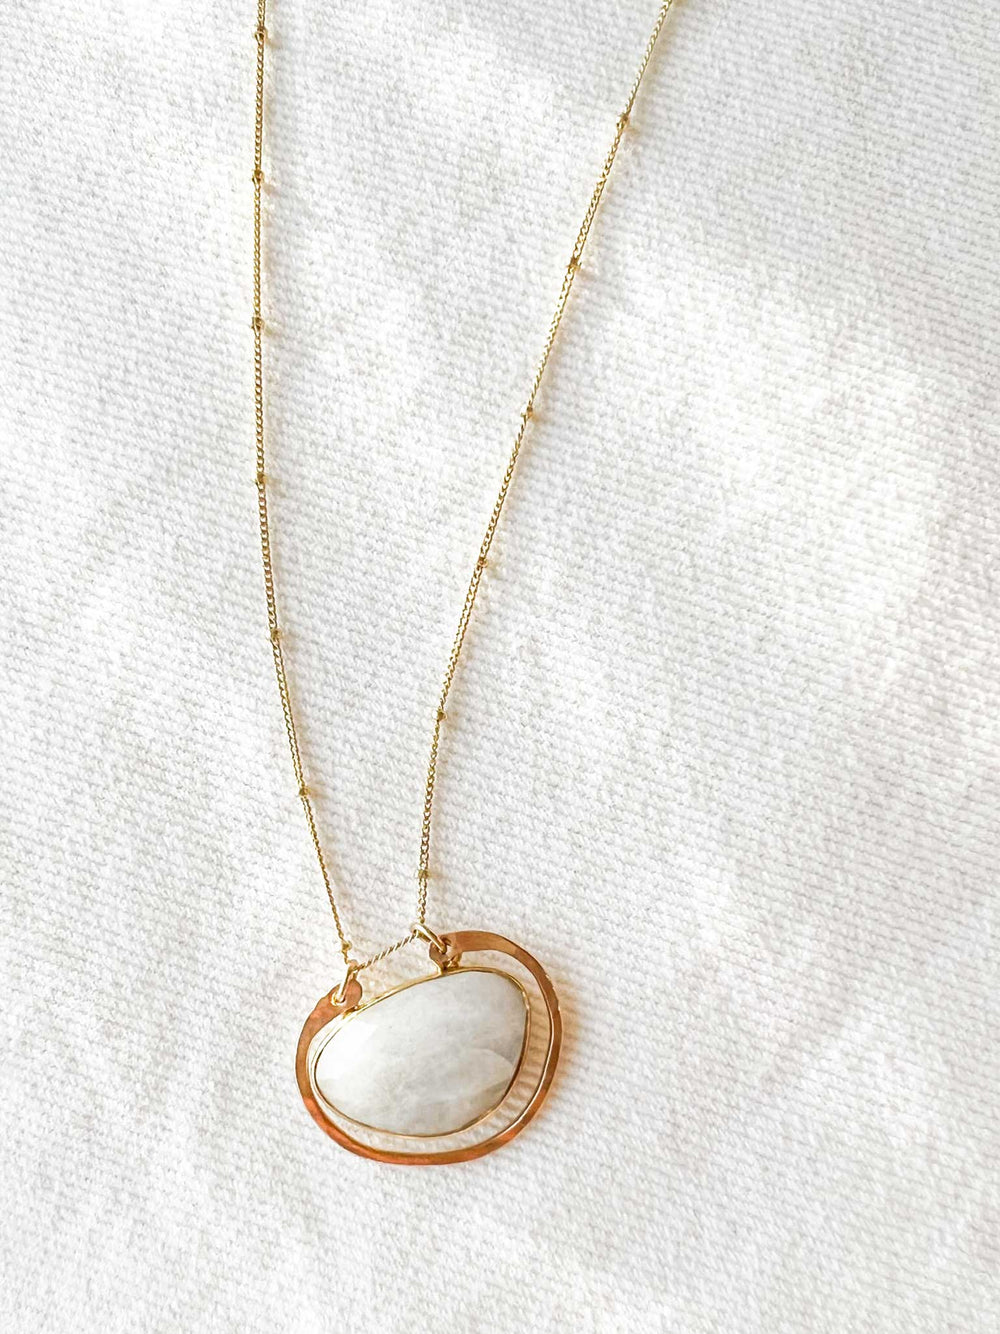 Necklace with White Stone Pendant